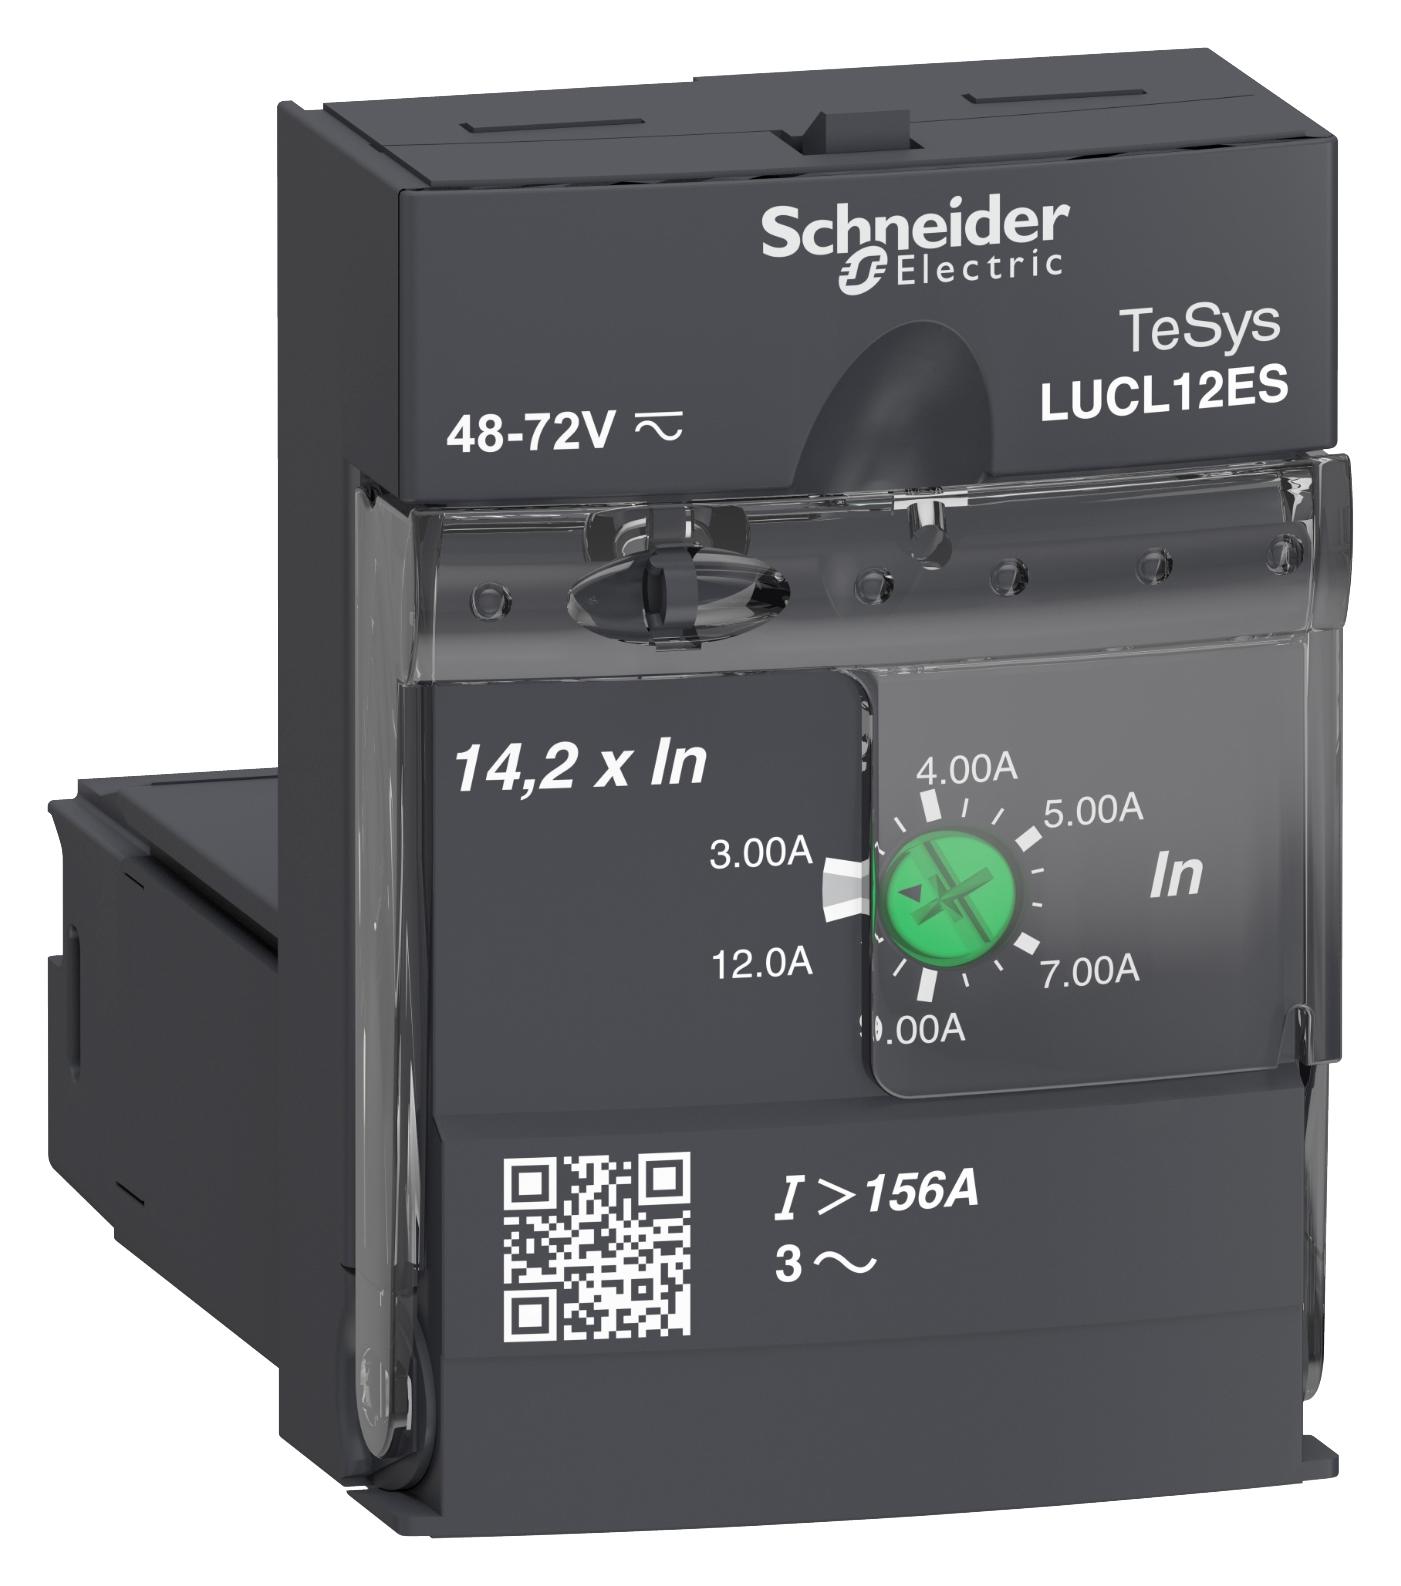 LUCL12ES MAG. PROT. 3-12A 48-72VDC 48VAC SCHNEIDER ELECTRIC